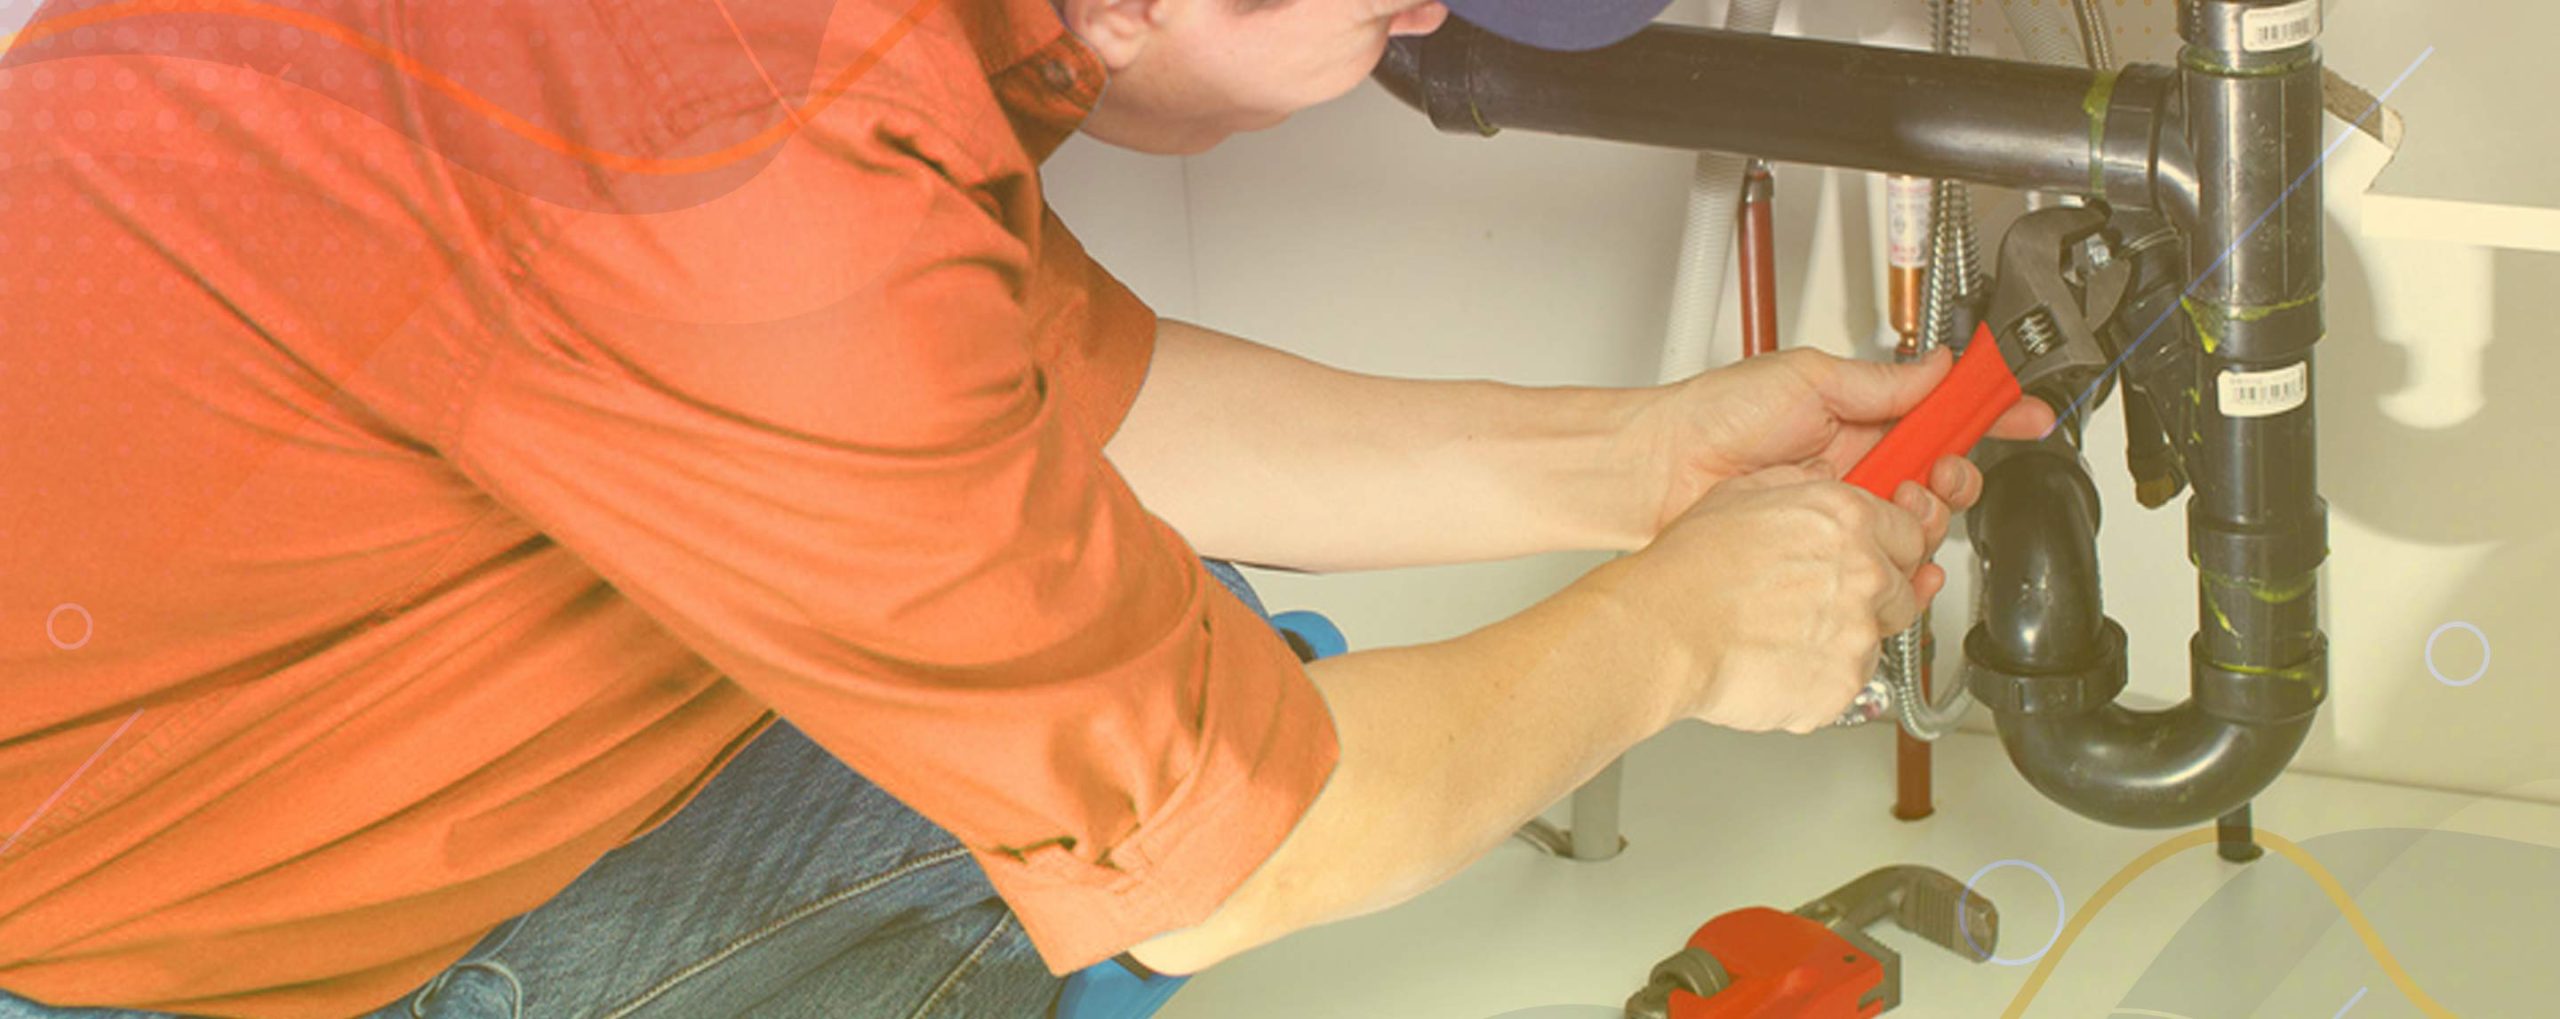 How Do You Know When It's Time To Call An Emergency Plumber?